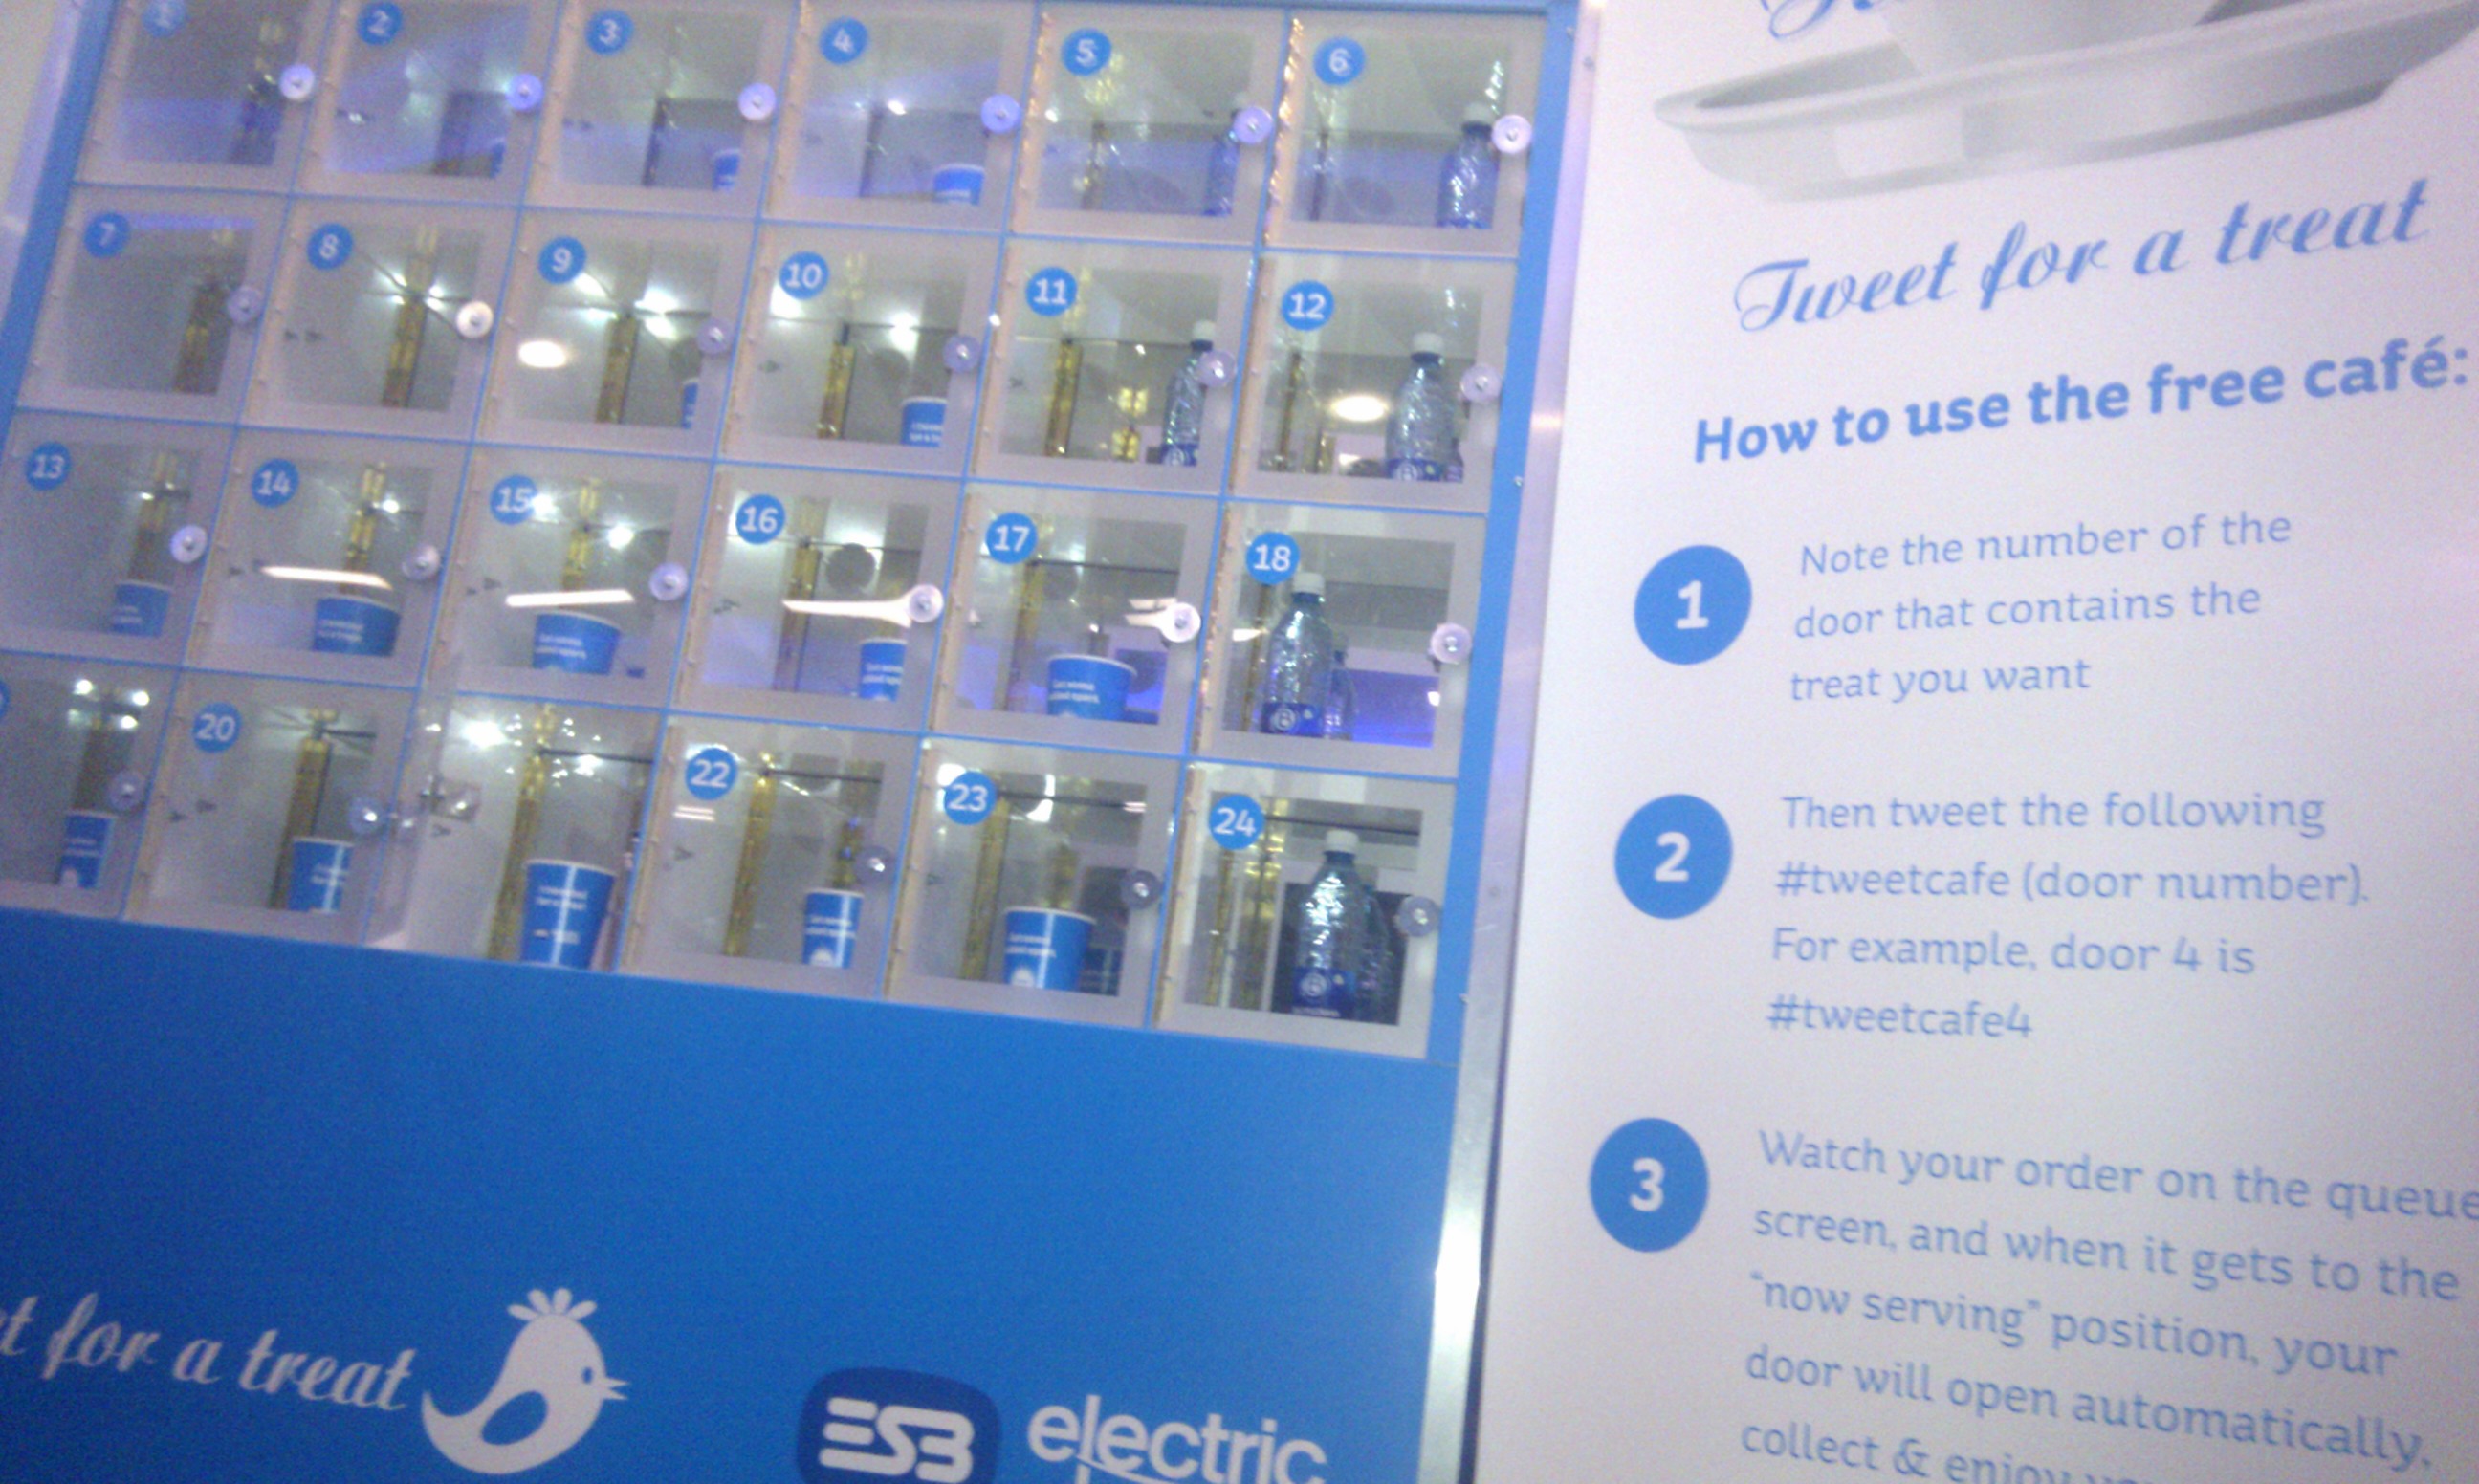 Electric Ireland Tweet for a treat Twitter Café system